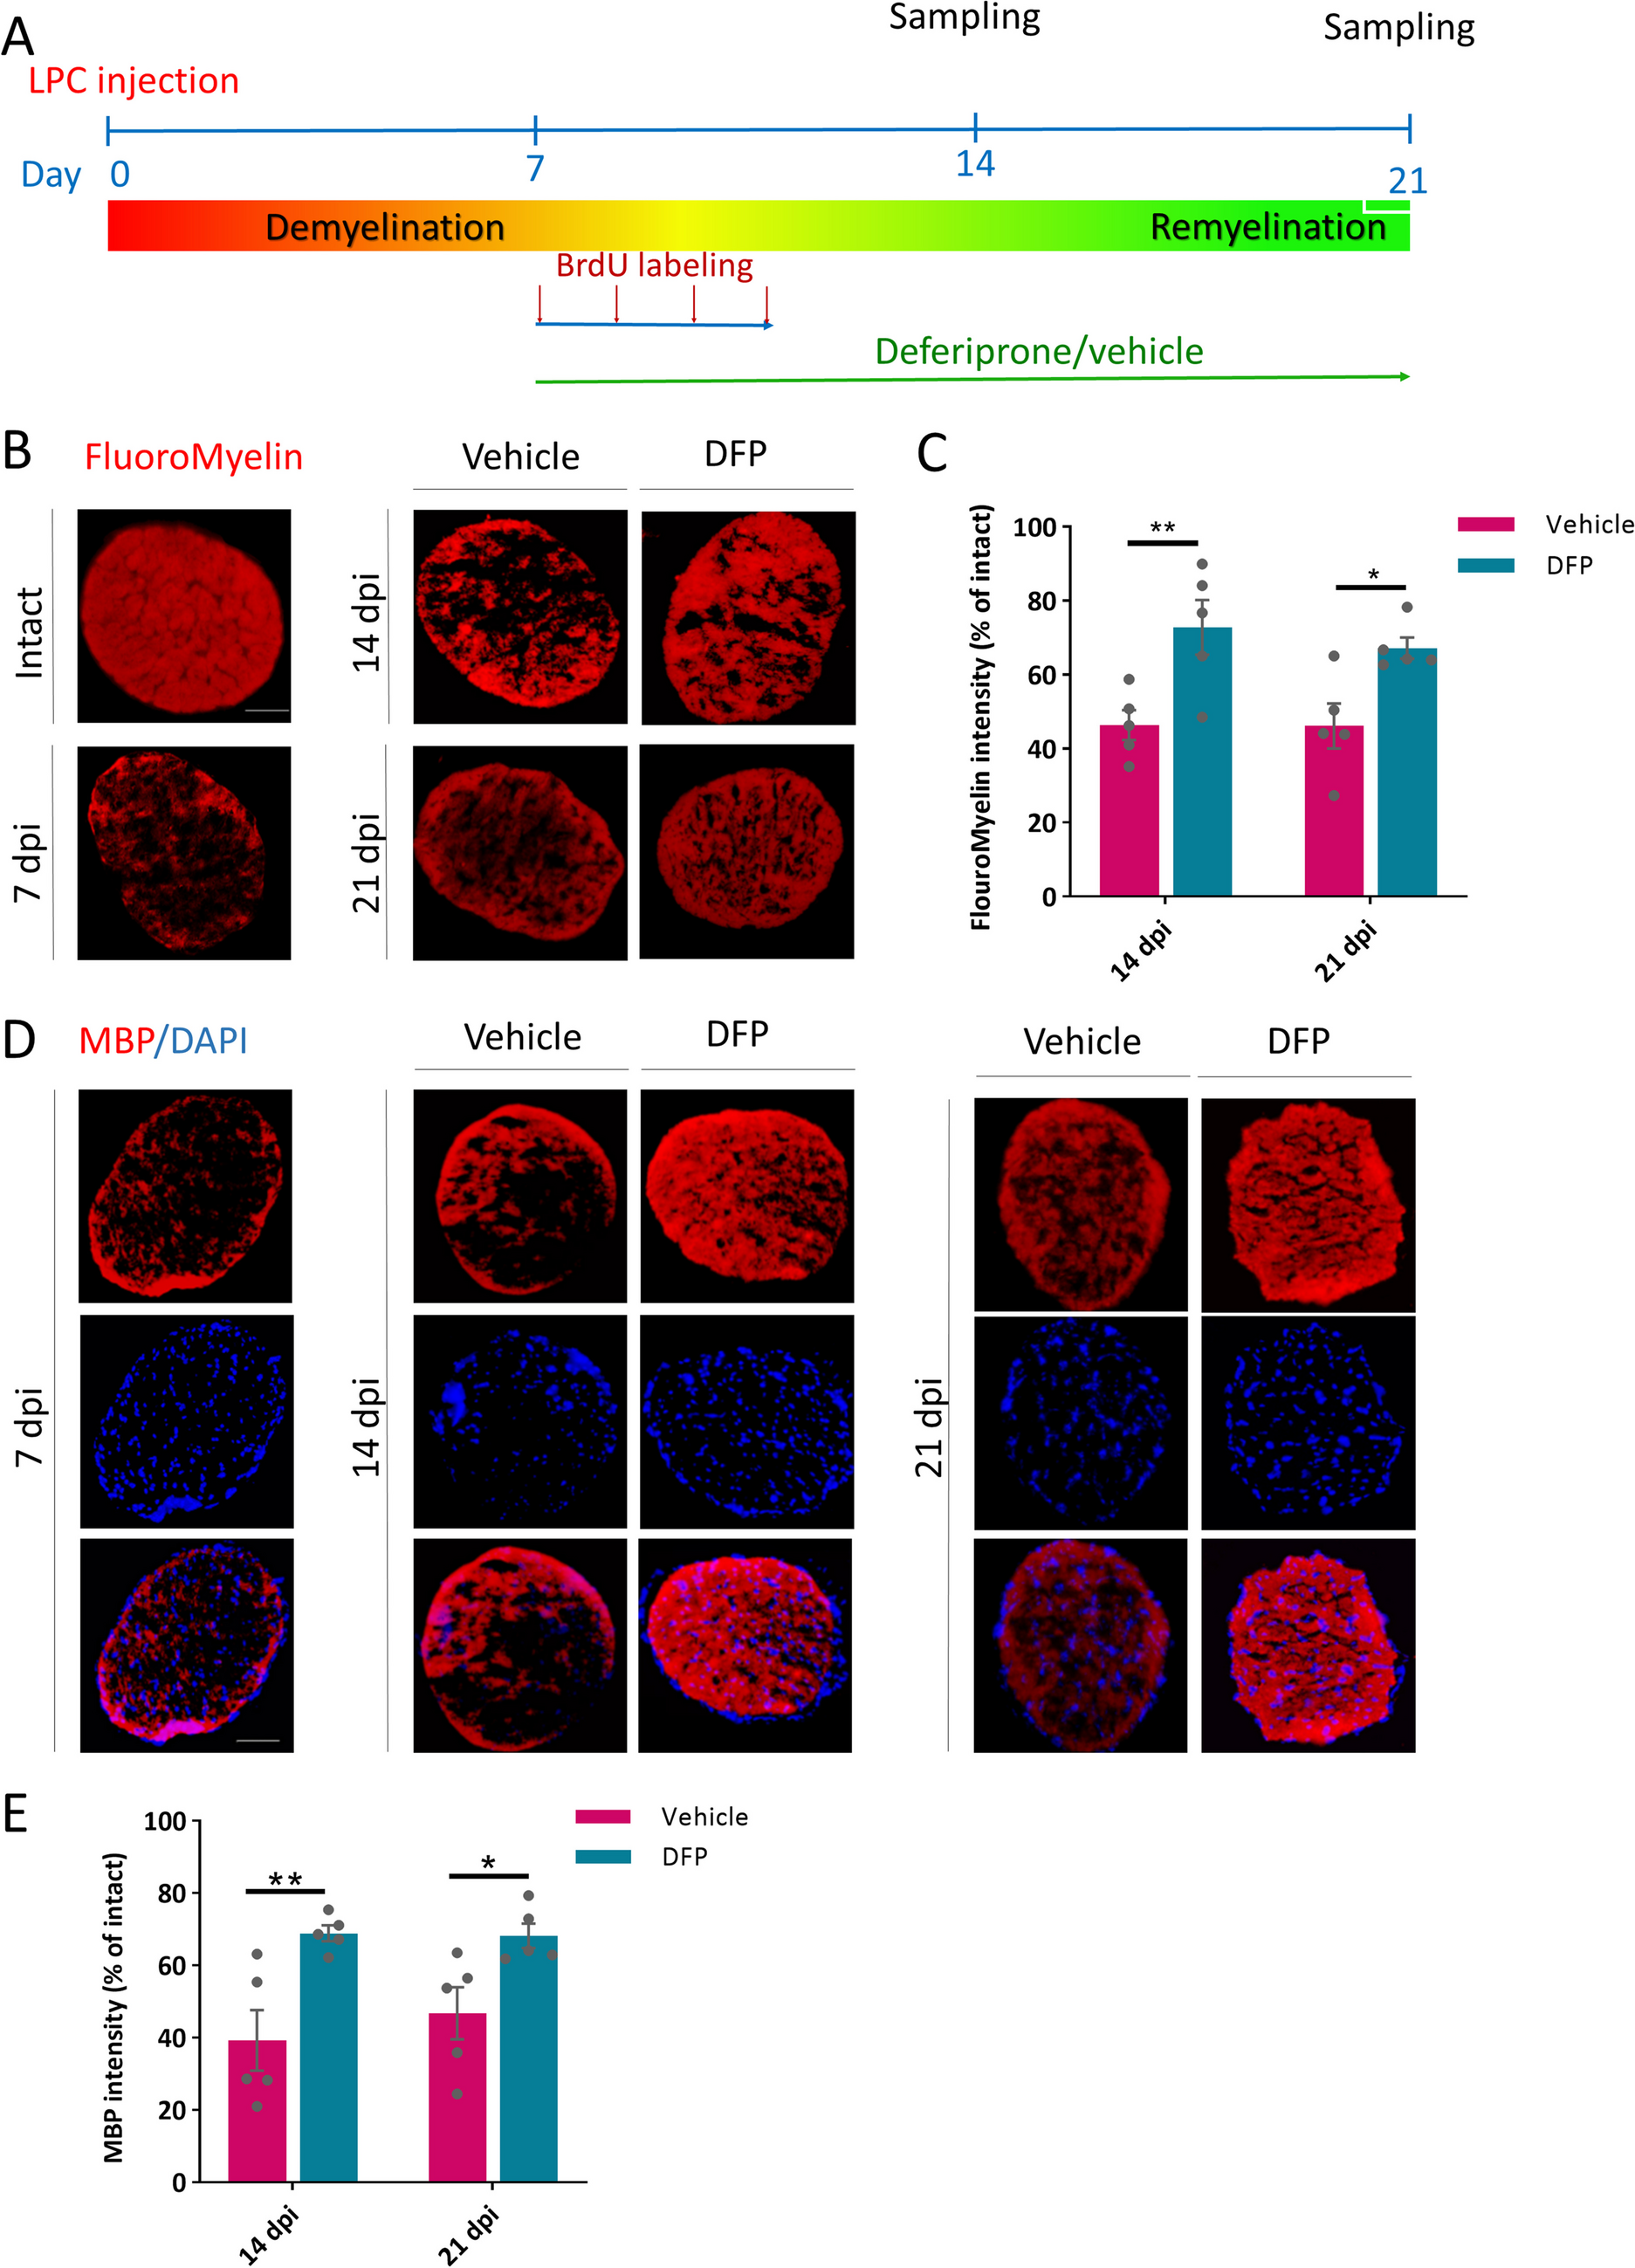 Deferiprone promoted remyelination and functional recovery through enhancement of oligodendrogenesis in experimental demyelination animal model